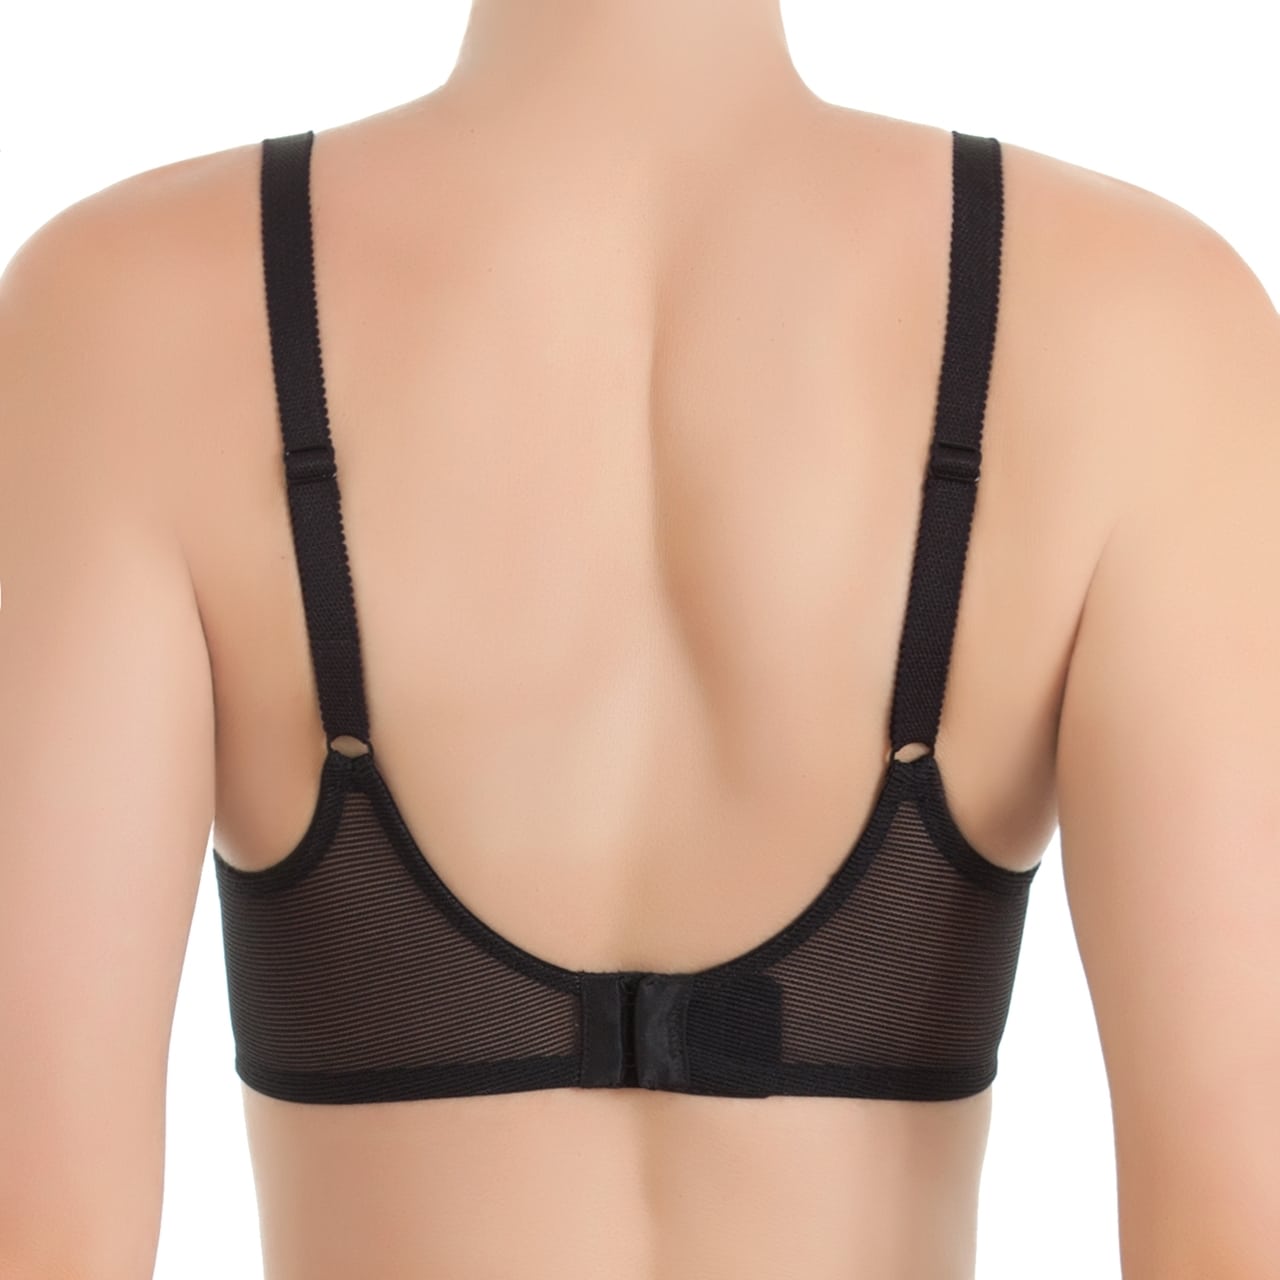 Wacoal Visual Effects Minimizer Bra 857210, Reduces Bustline up to